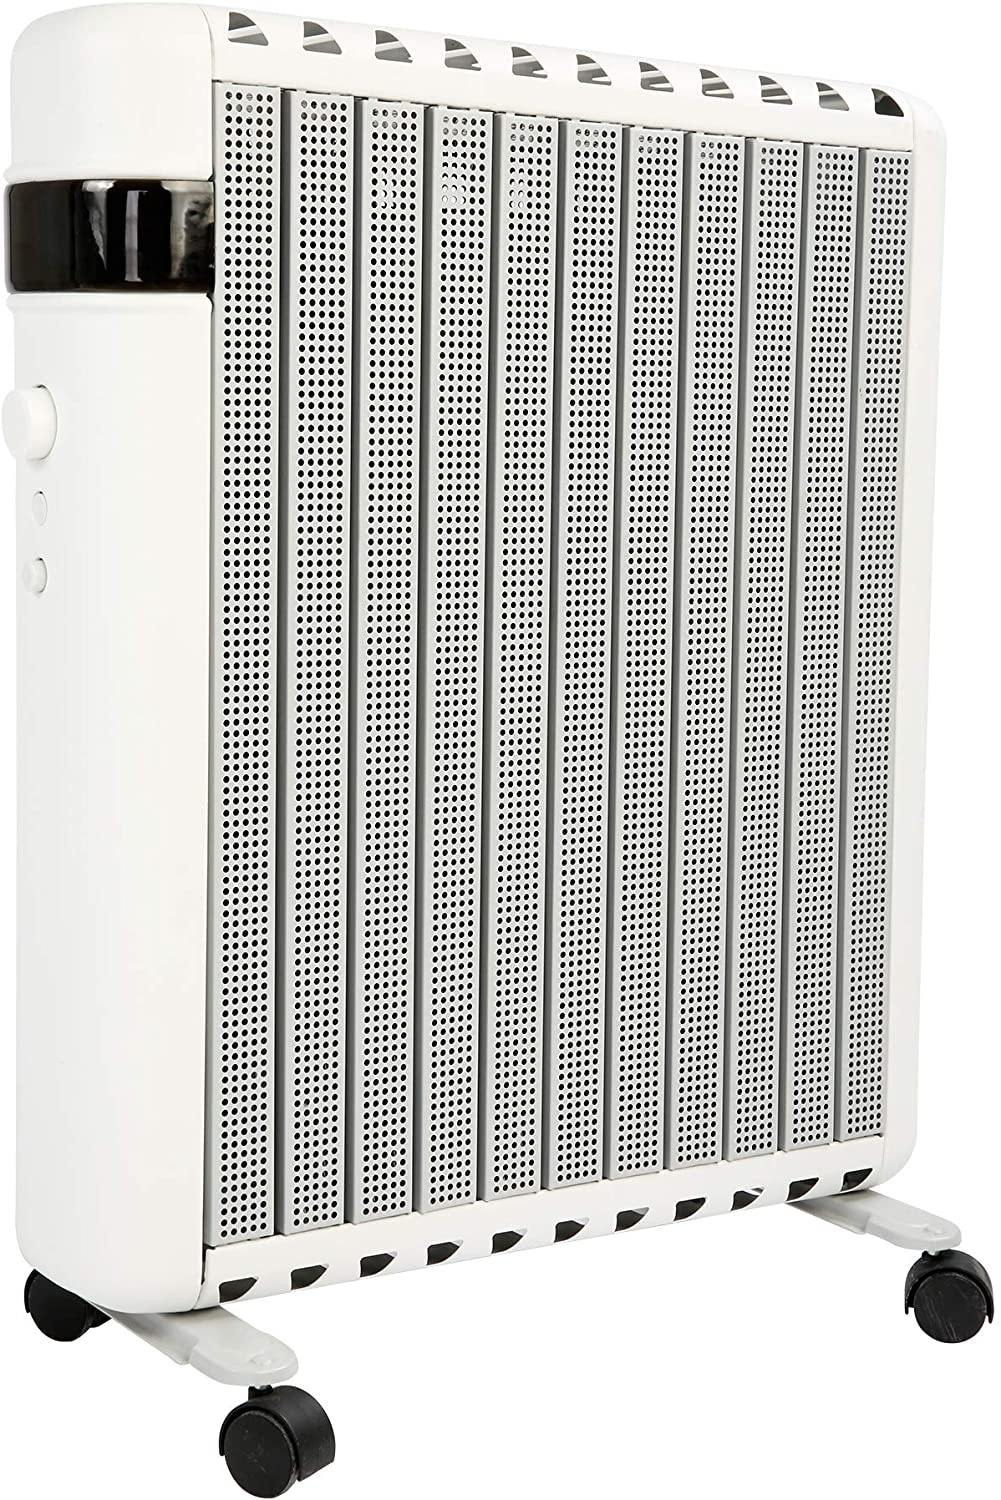 1500W Portable Space Heaters Adjustable Thermostat Room Heater with Overheat Protection & Tip-Over Protection for Indoor Use - Bosonshop